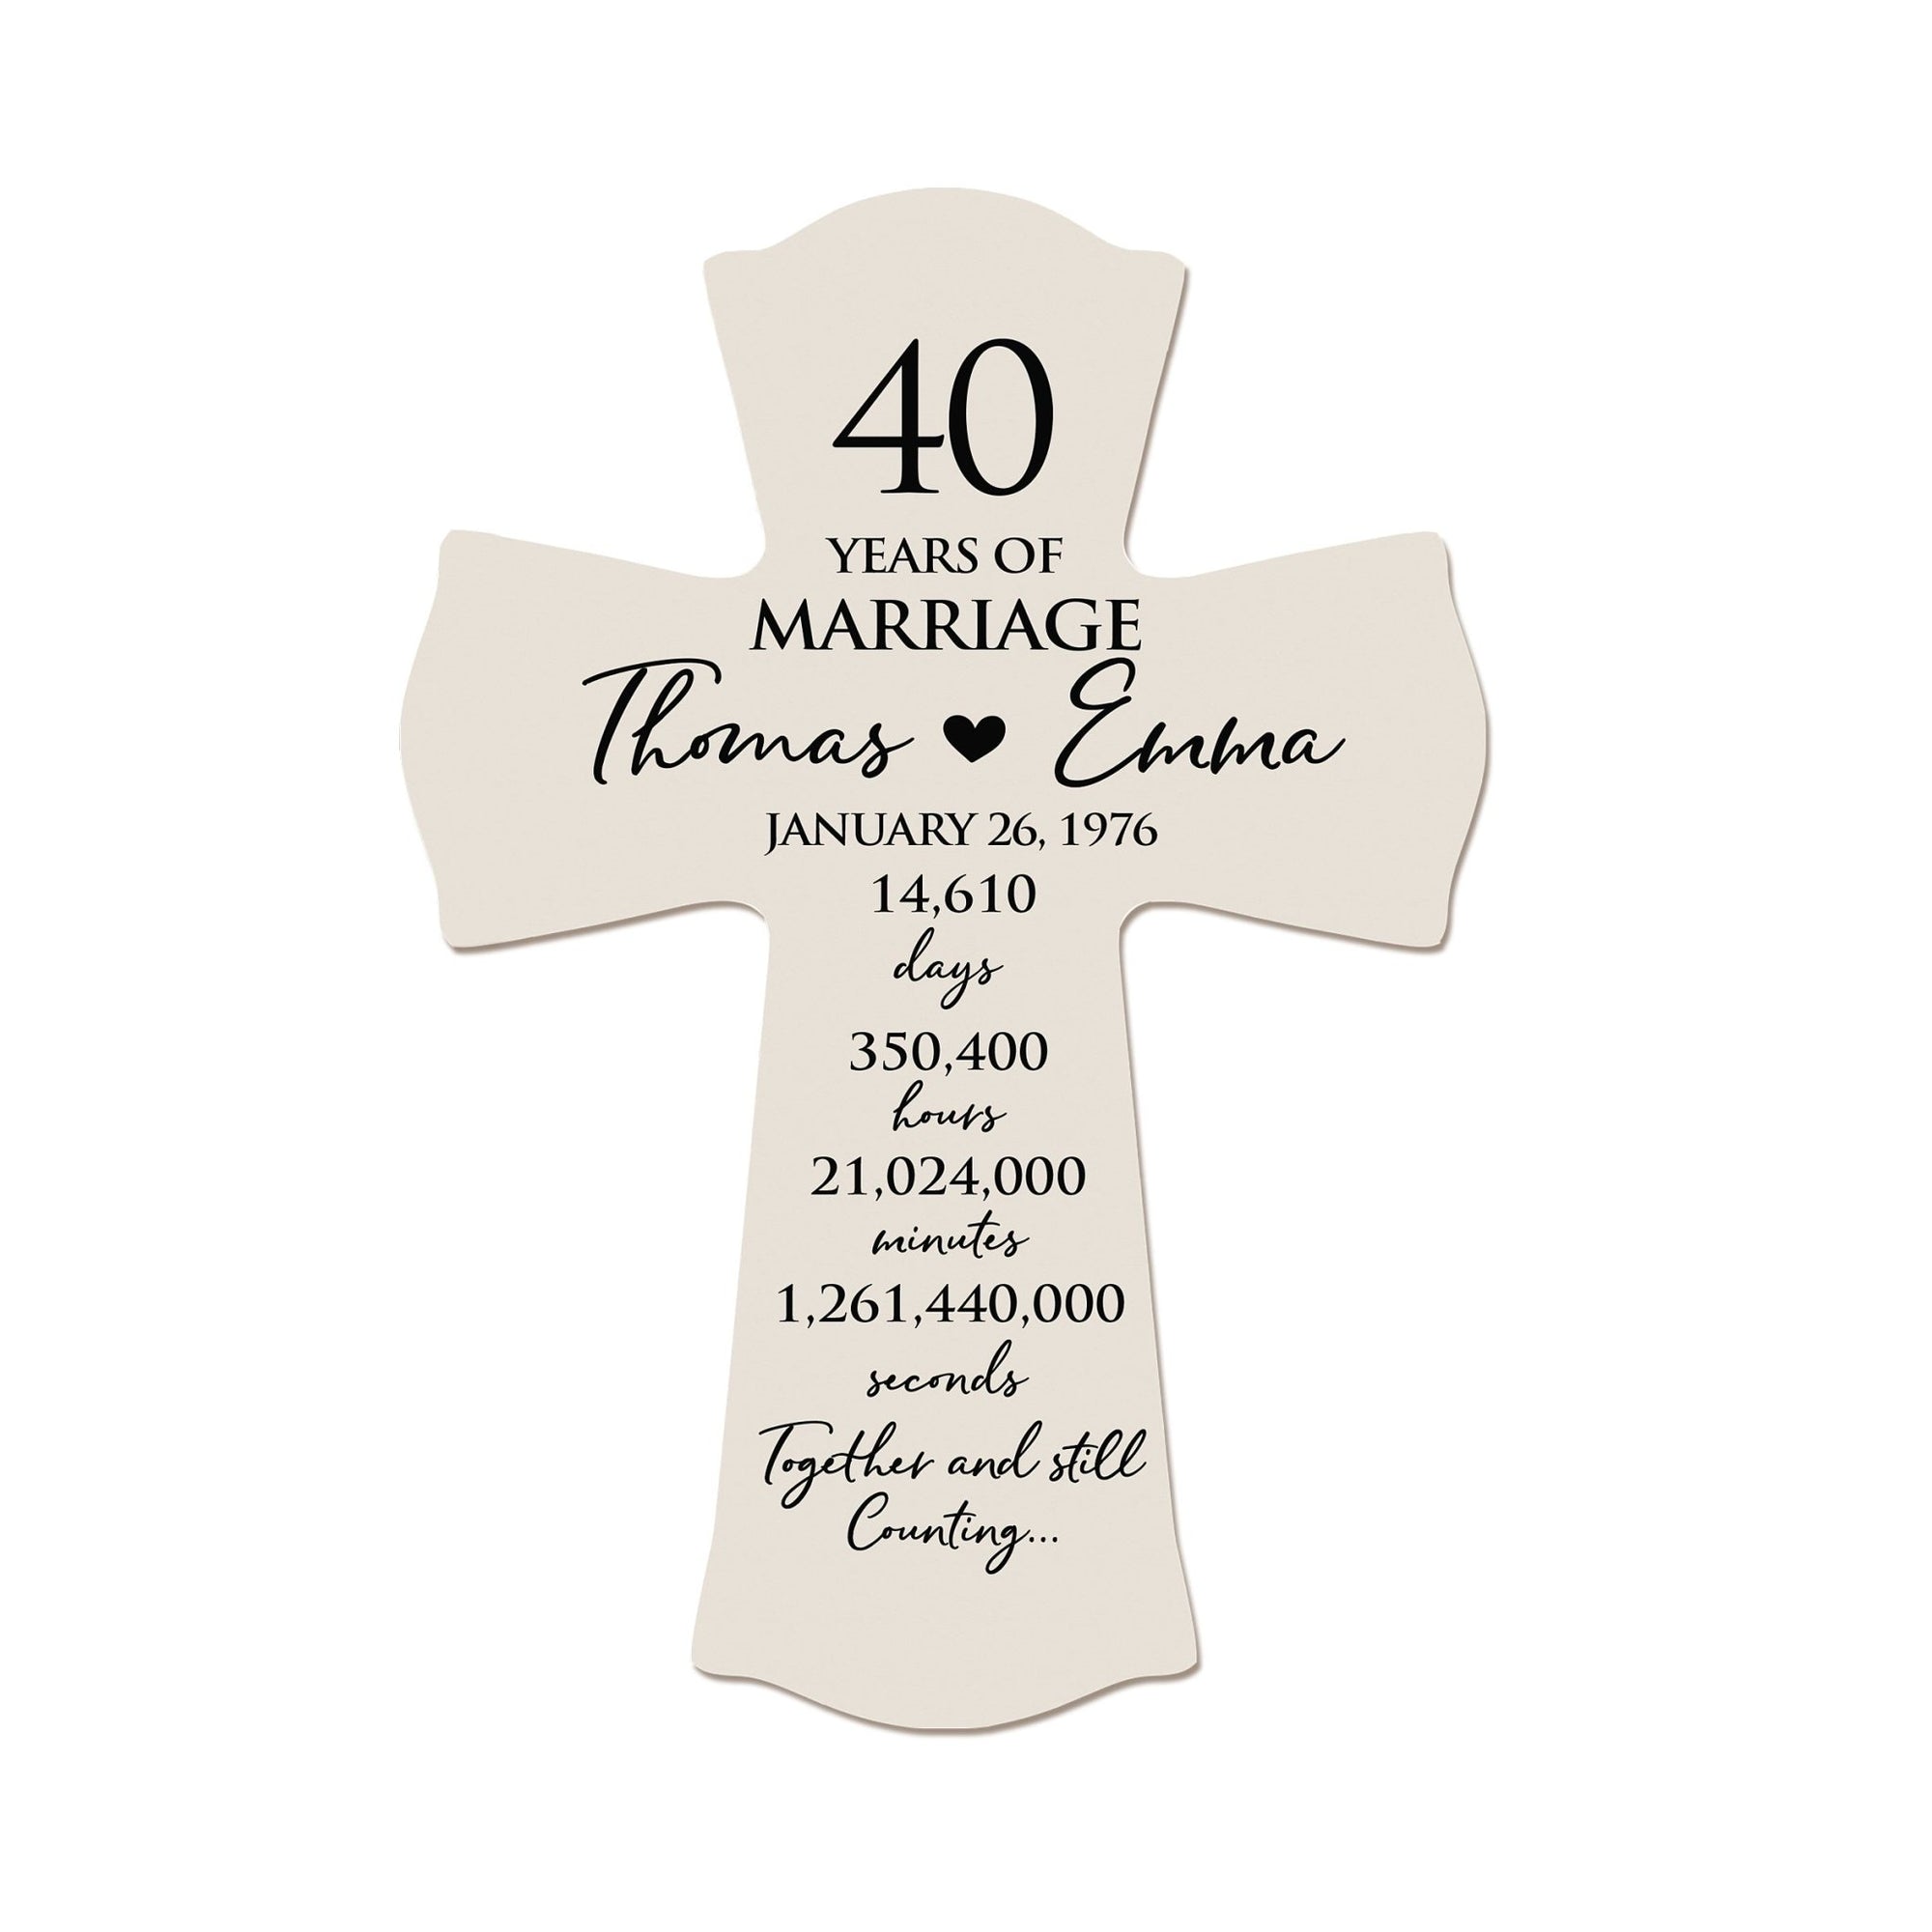 Celebrate 40 years of love with a unique personalized wedding wall cross for your parents